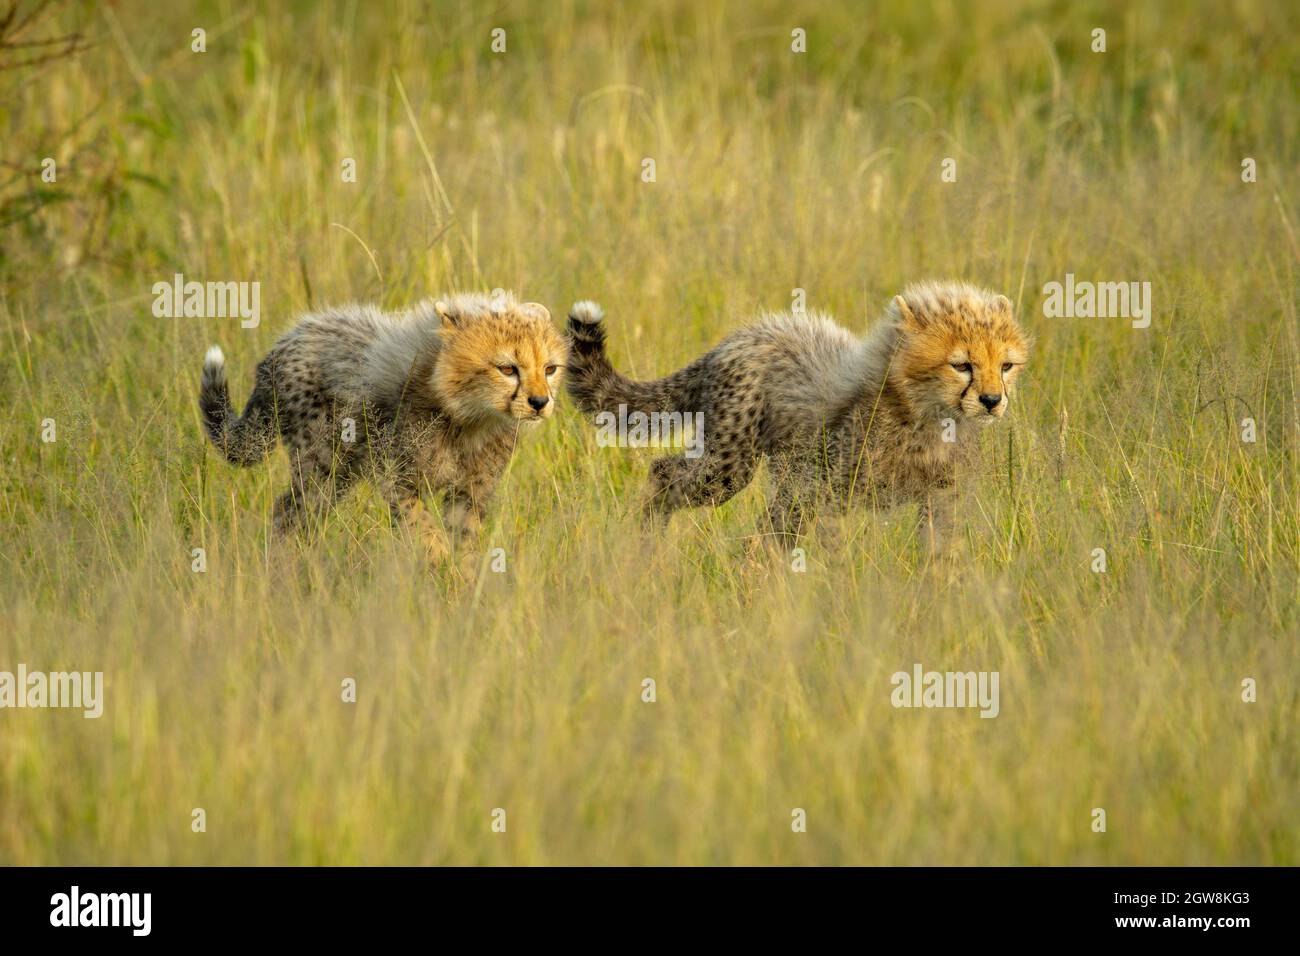 Two Cheetah Cubs Walk Through Grass Together Stock Photo